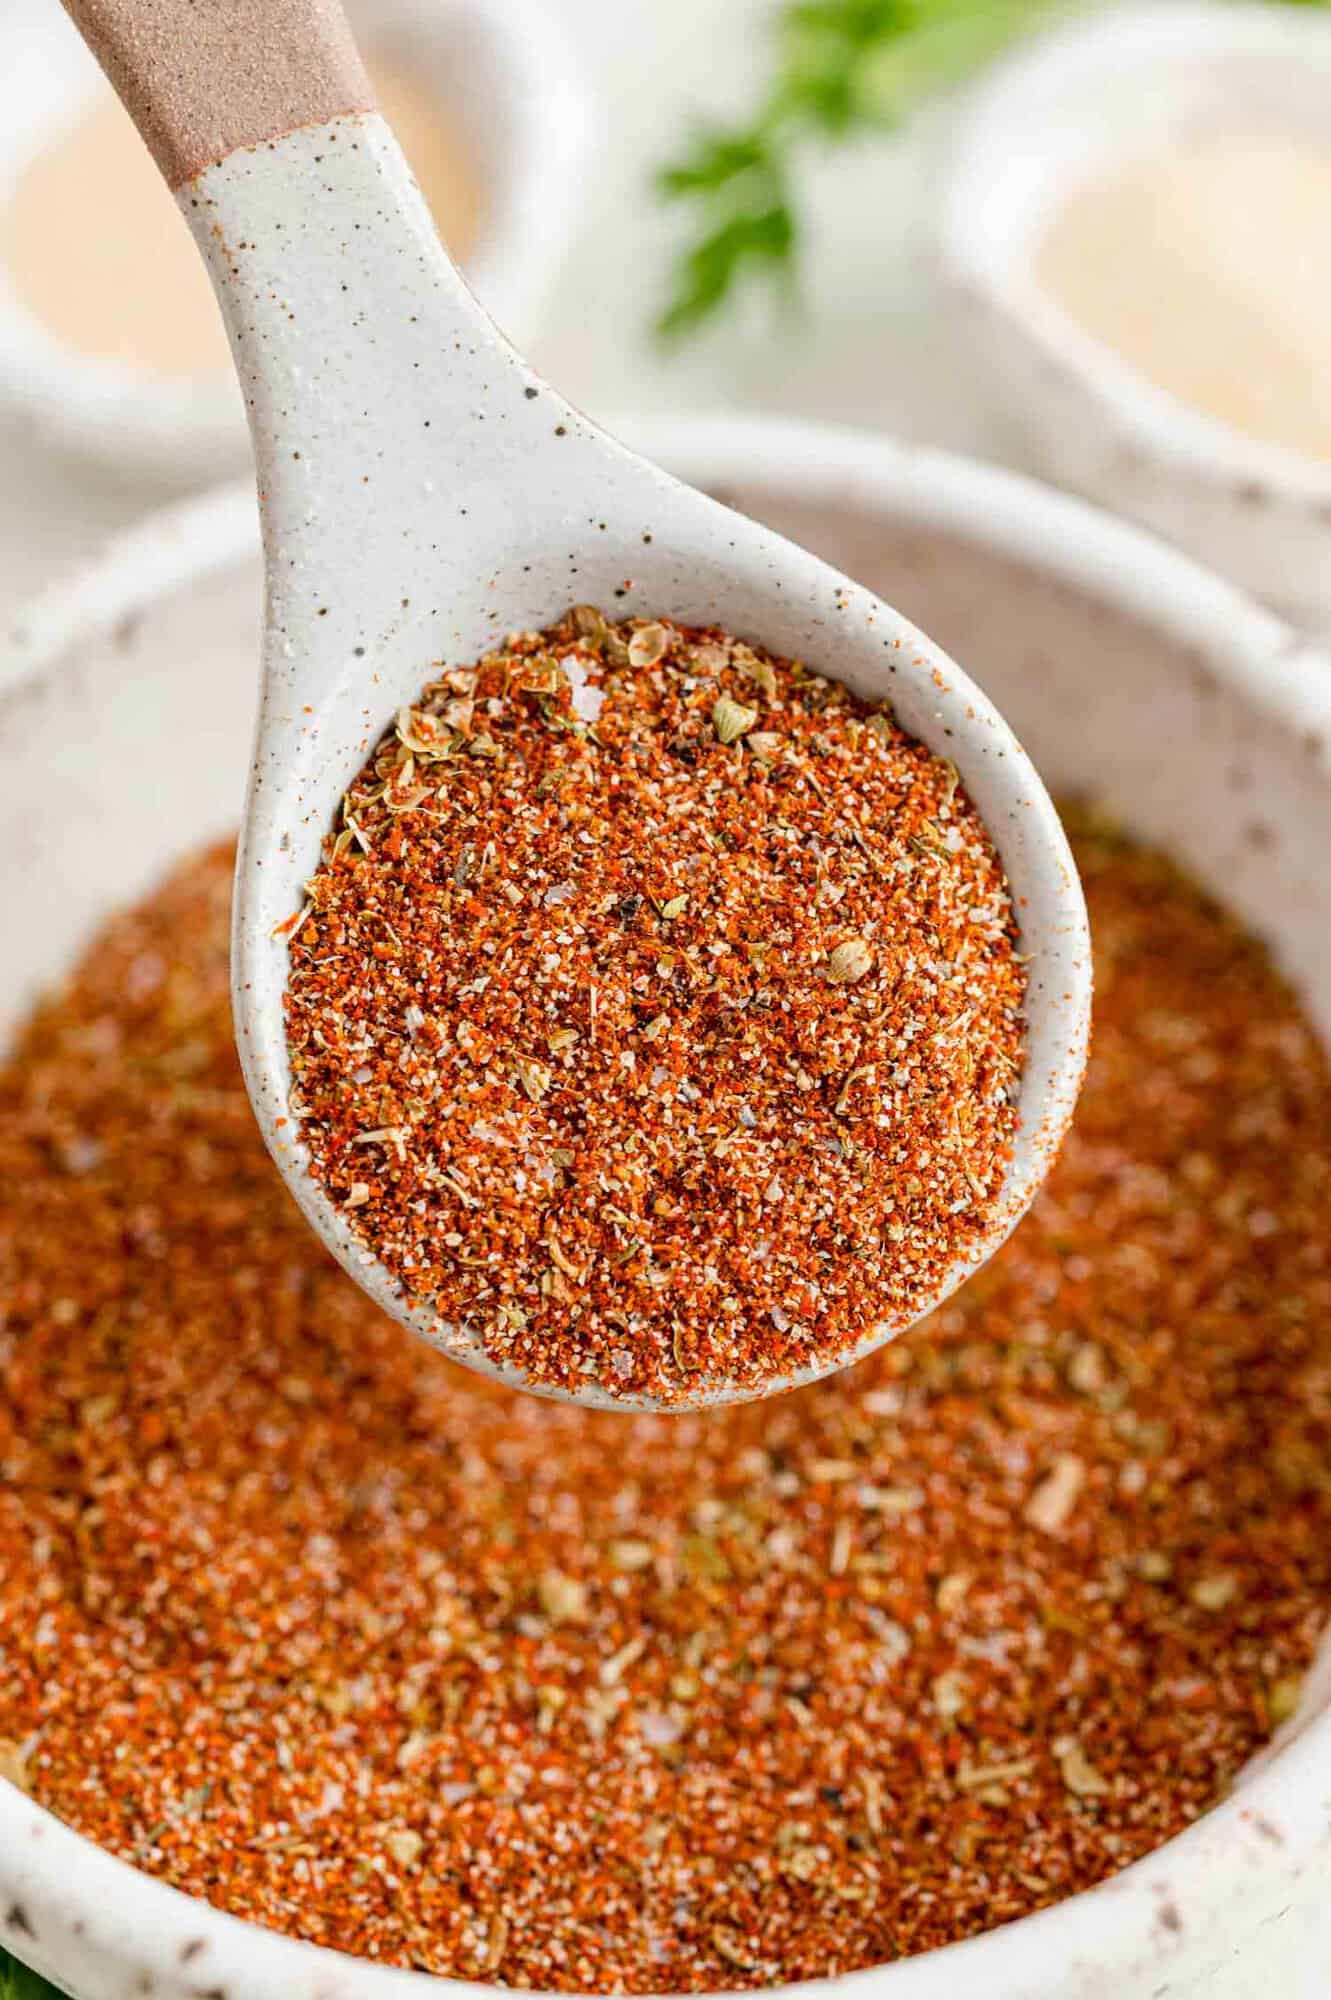 A spoonful of Southwest spice blend held over a bowl of seasoning.